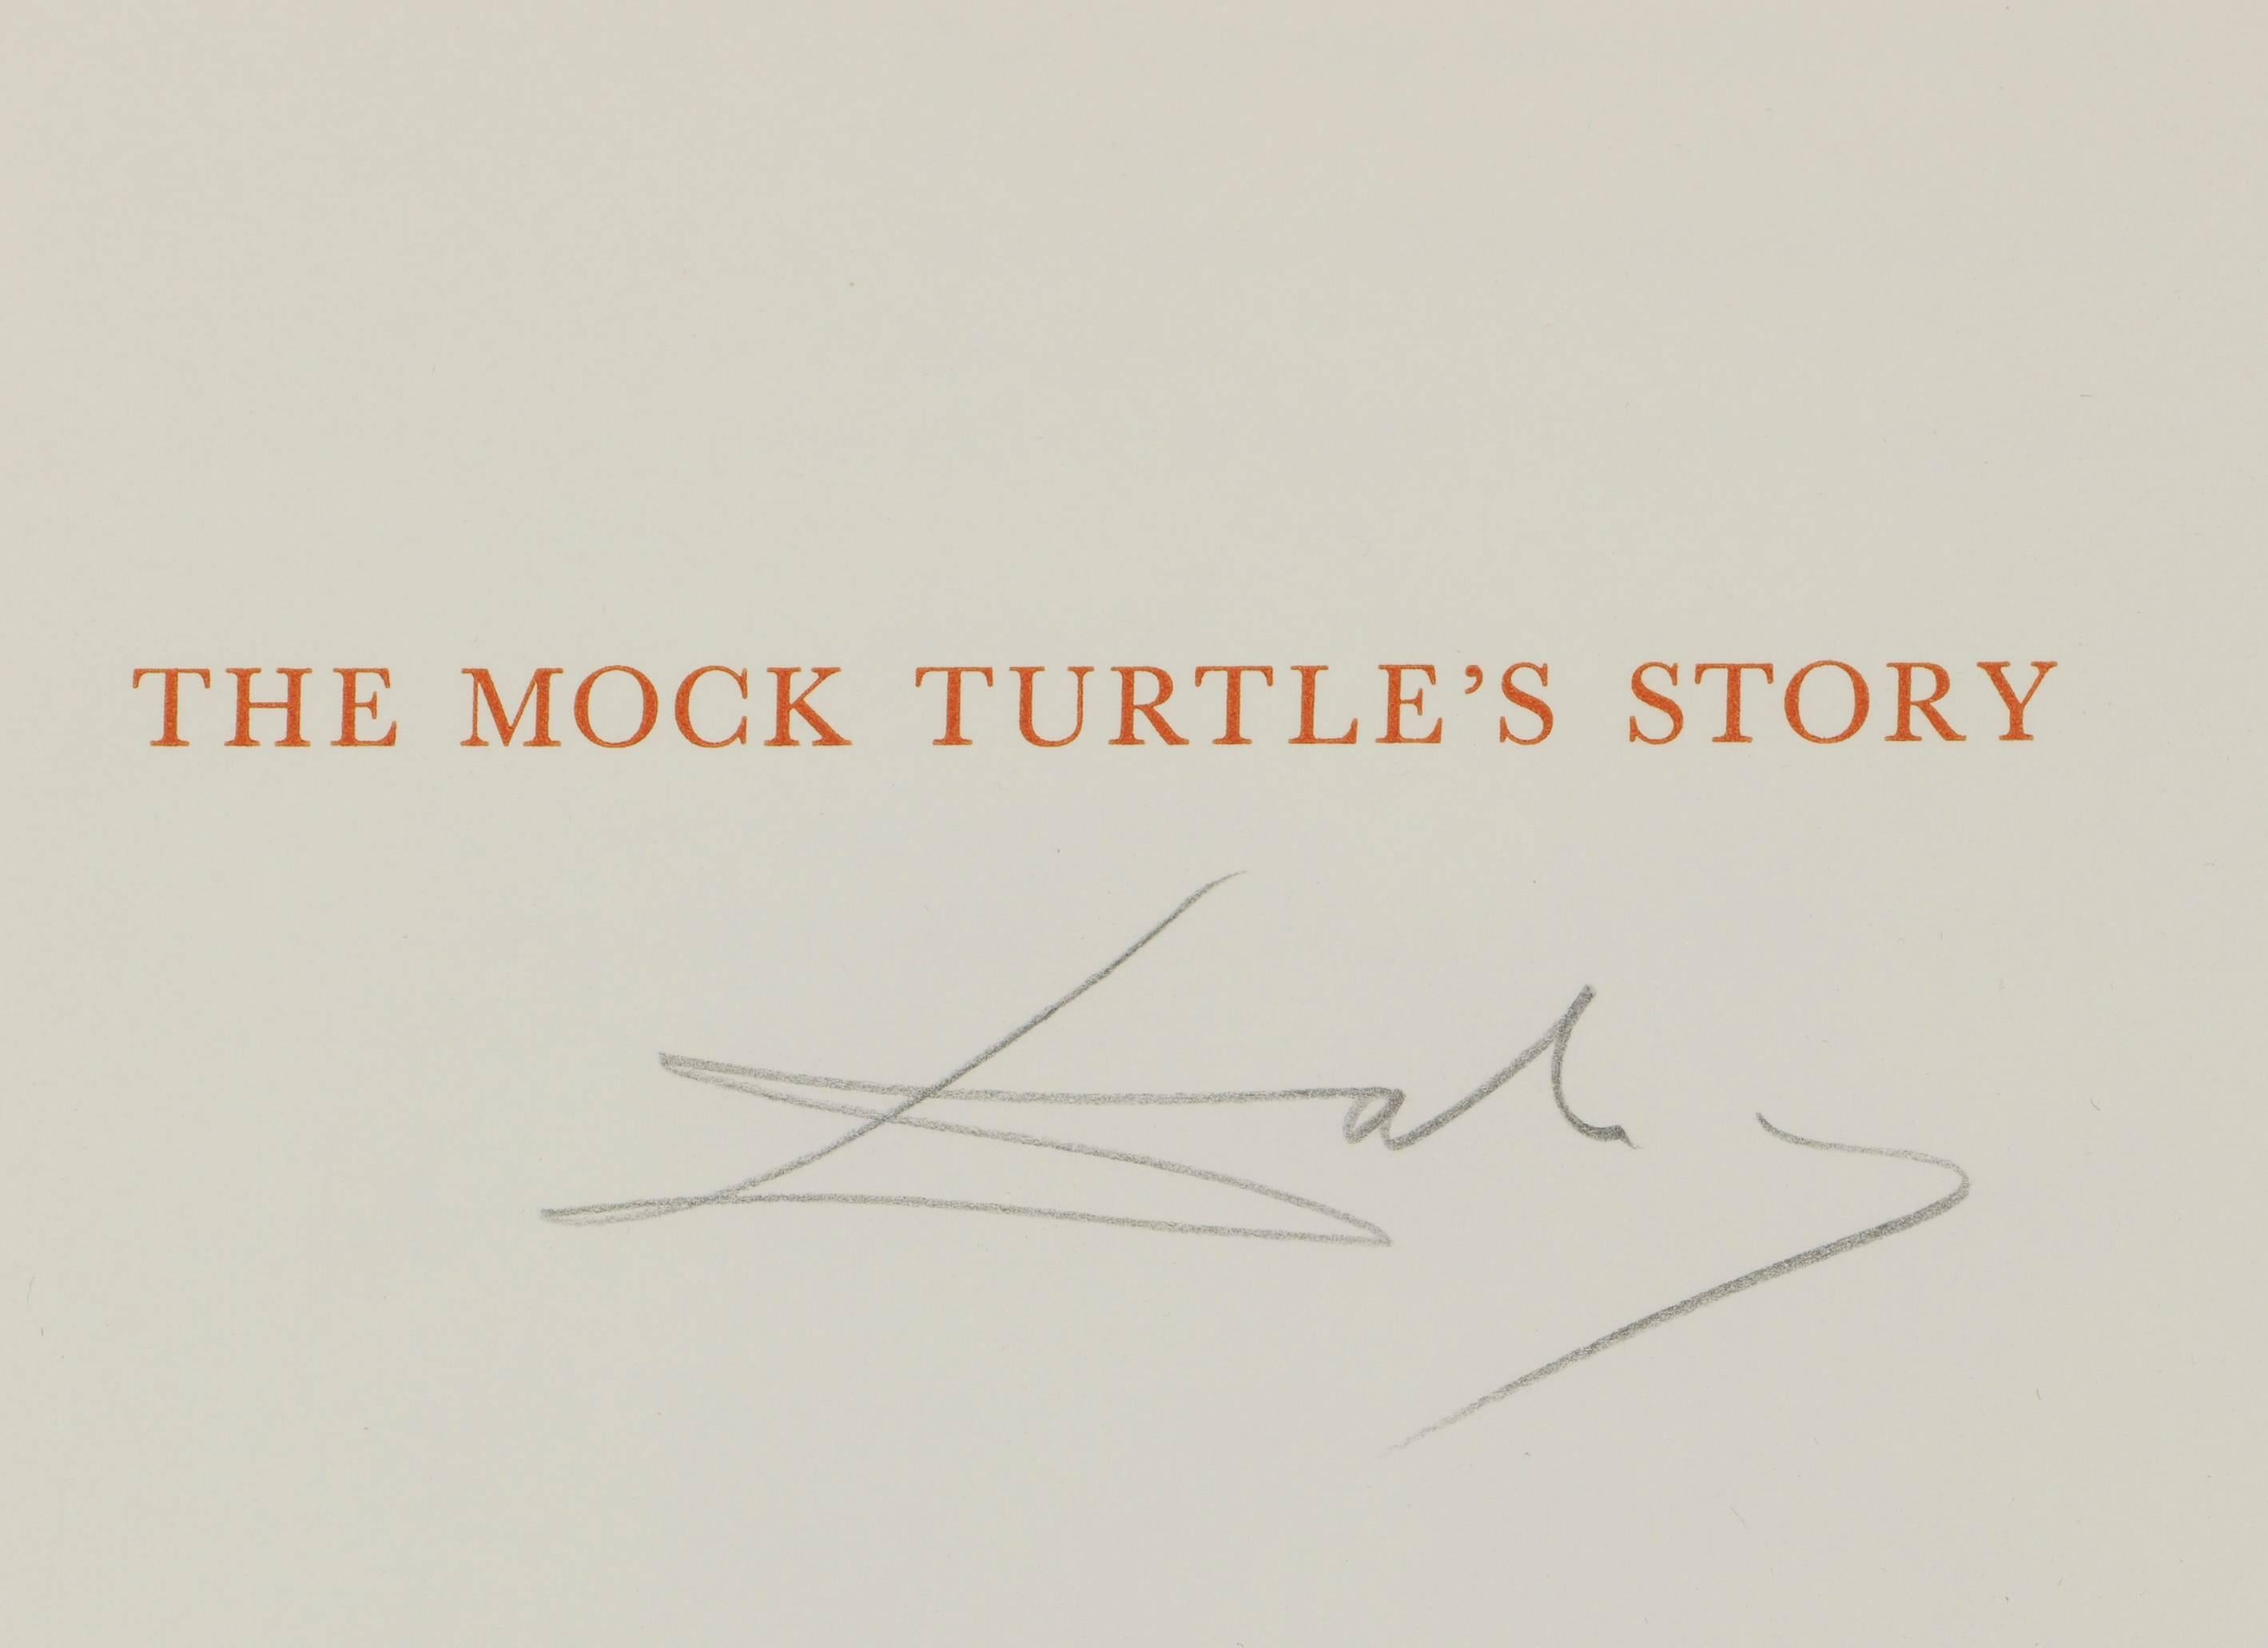 The Mock Turtle's Story - Surrealist Print by Salvador Dalí